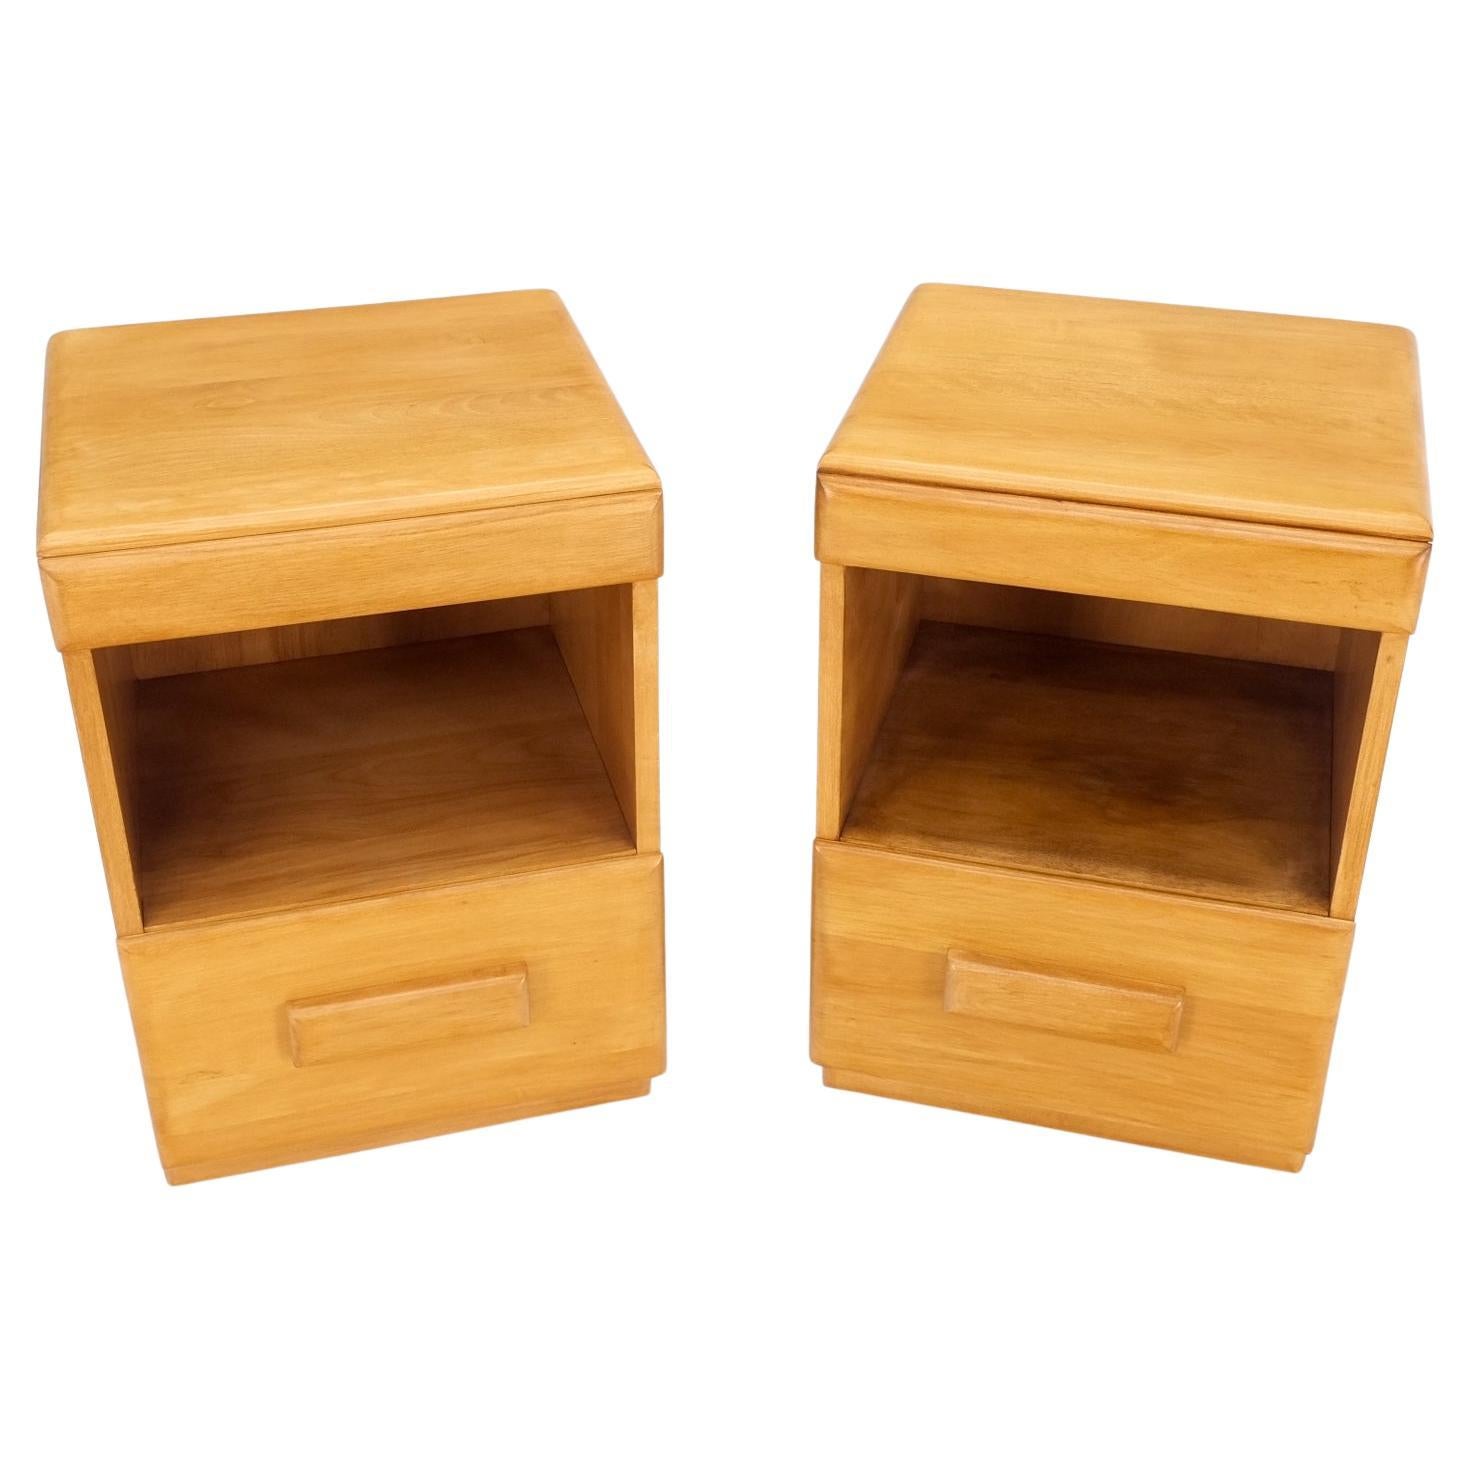 Russel Wright Conant Ball Pair Mid Century Modern Blond Birch Night Stands MINT! For Sale